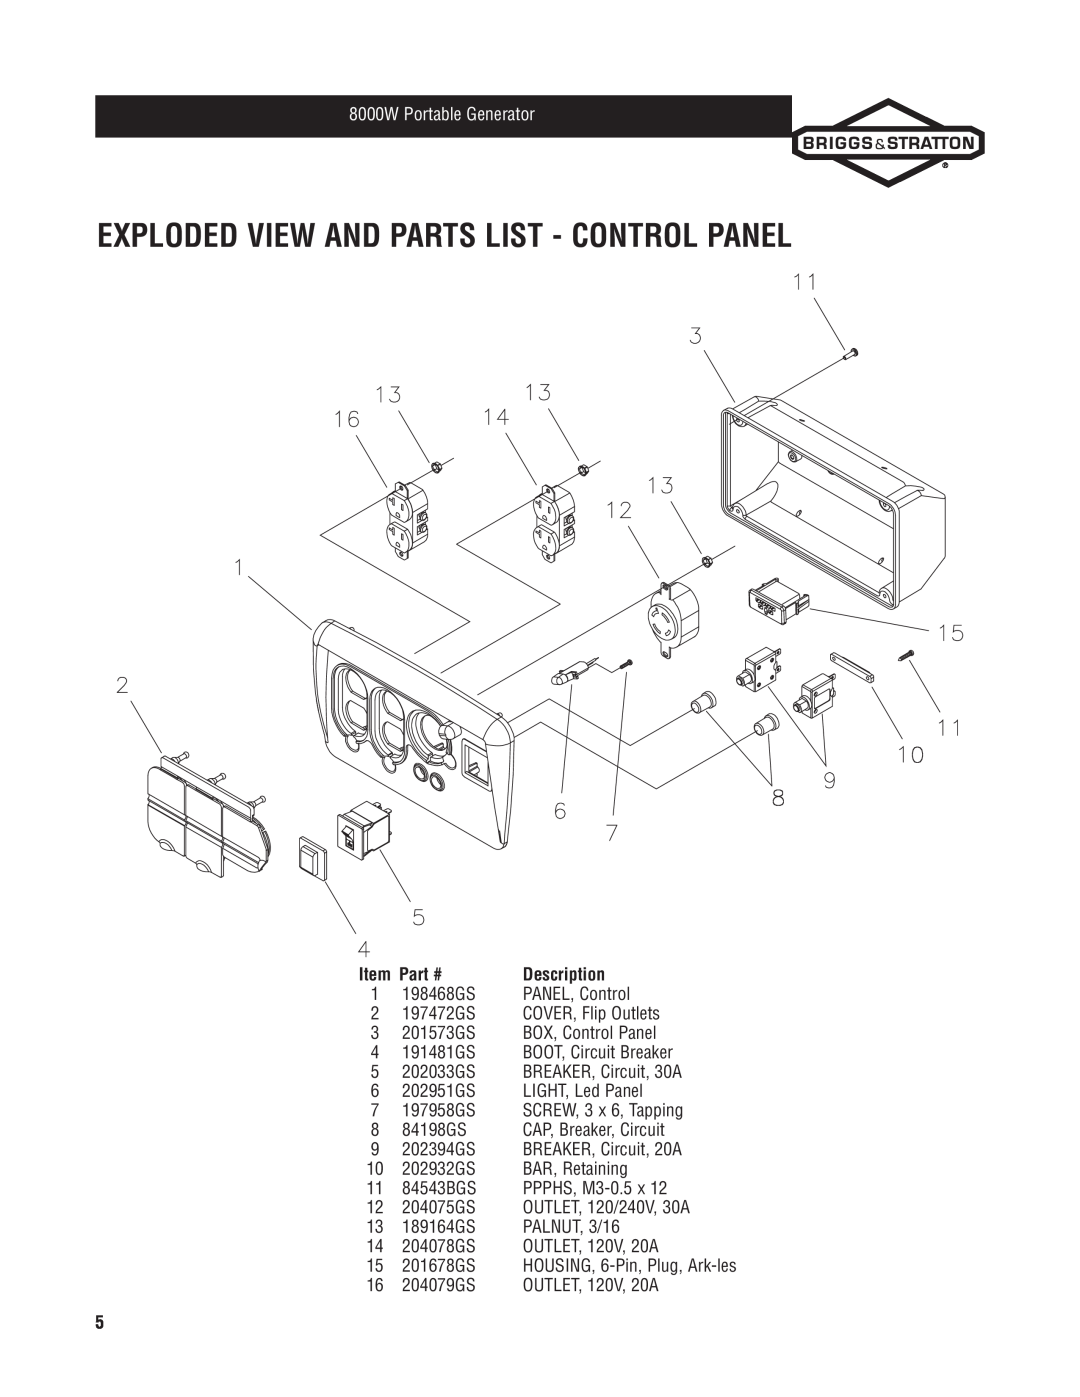 Briggs & Stratton 30334 manual Exploded View And Parts List - Control Panel, 8000W Portable Generator, Description 